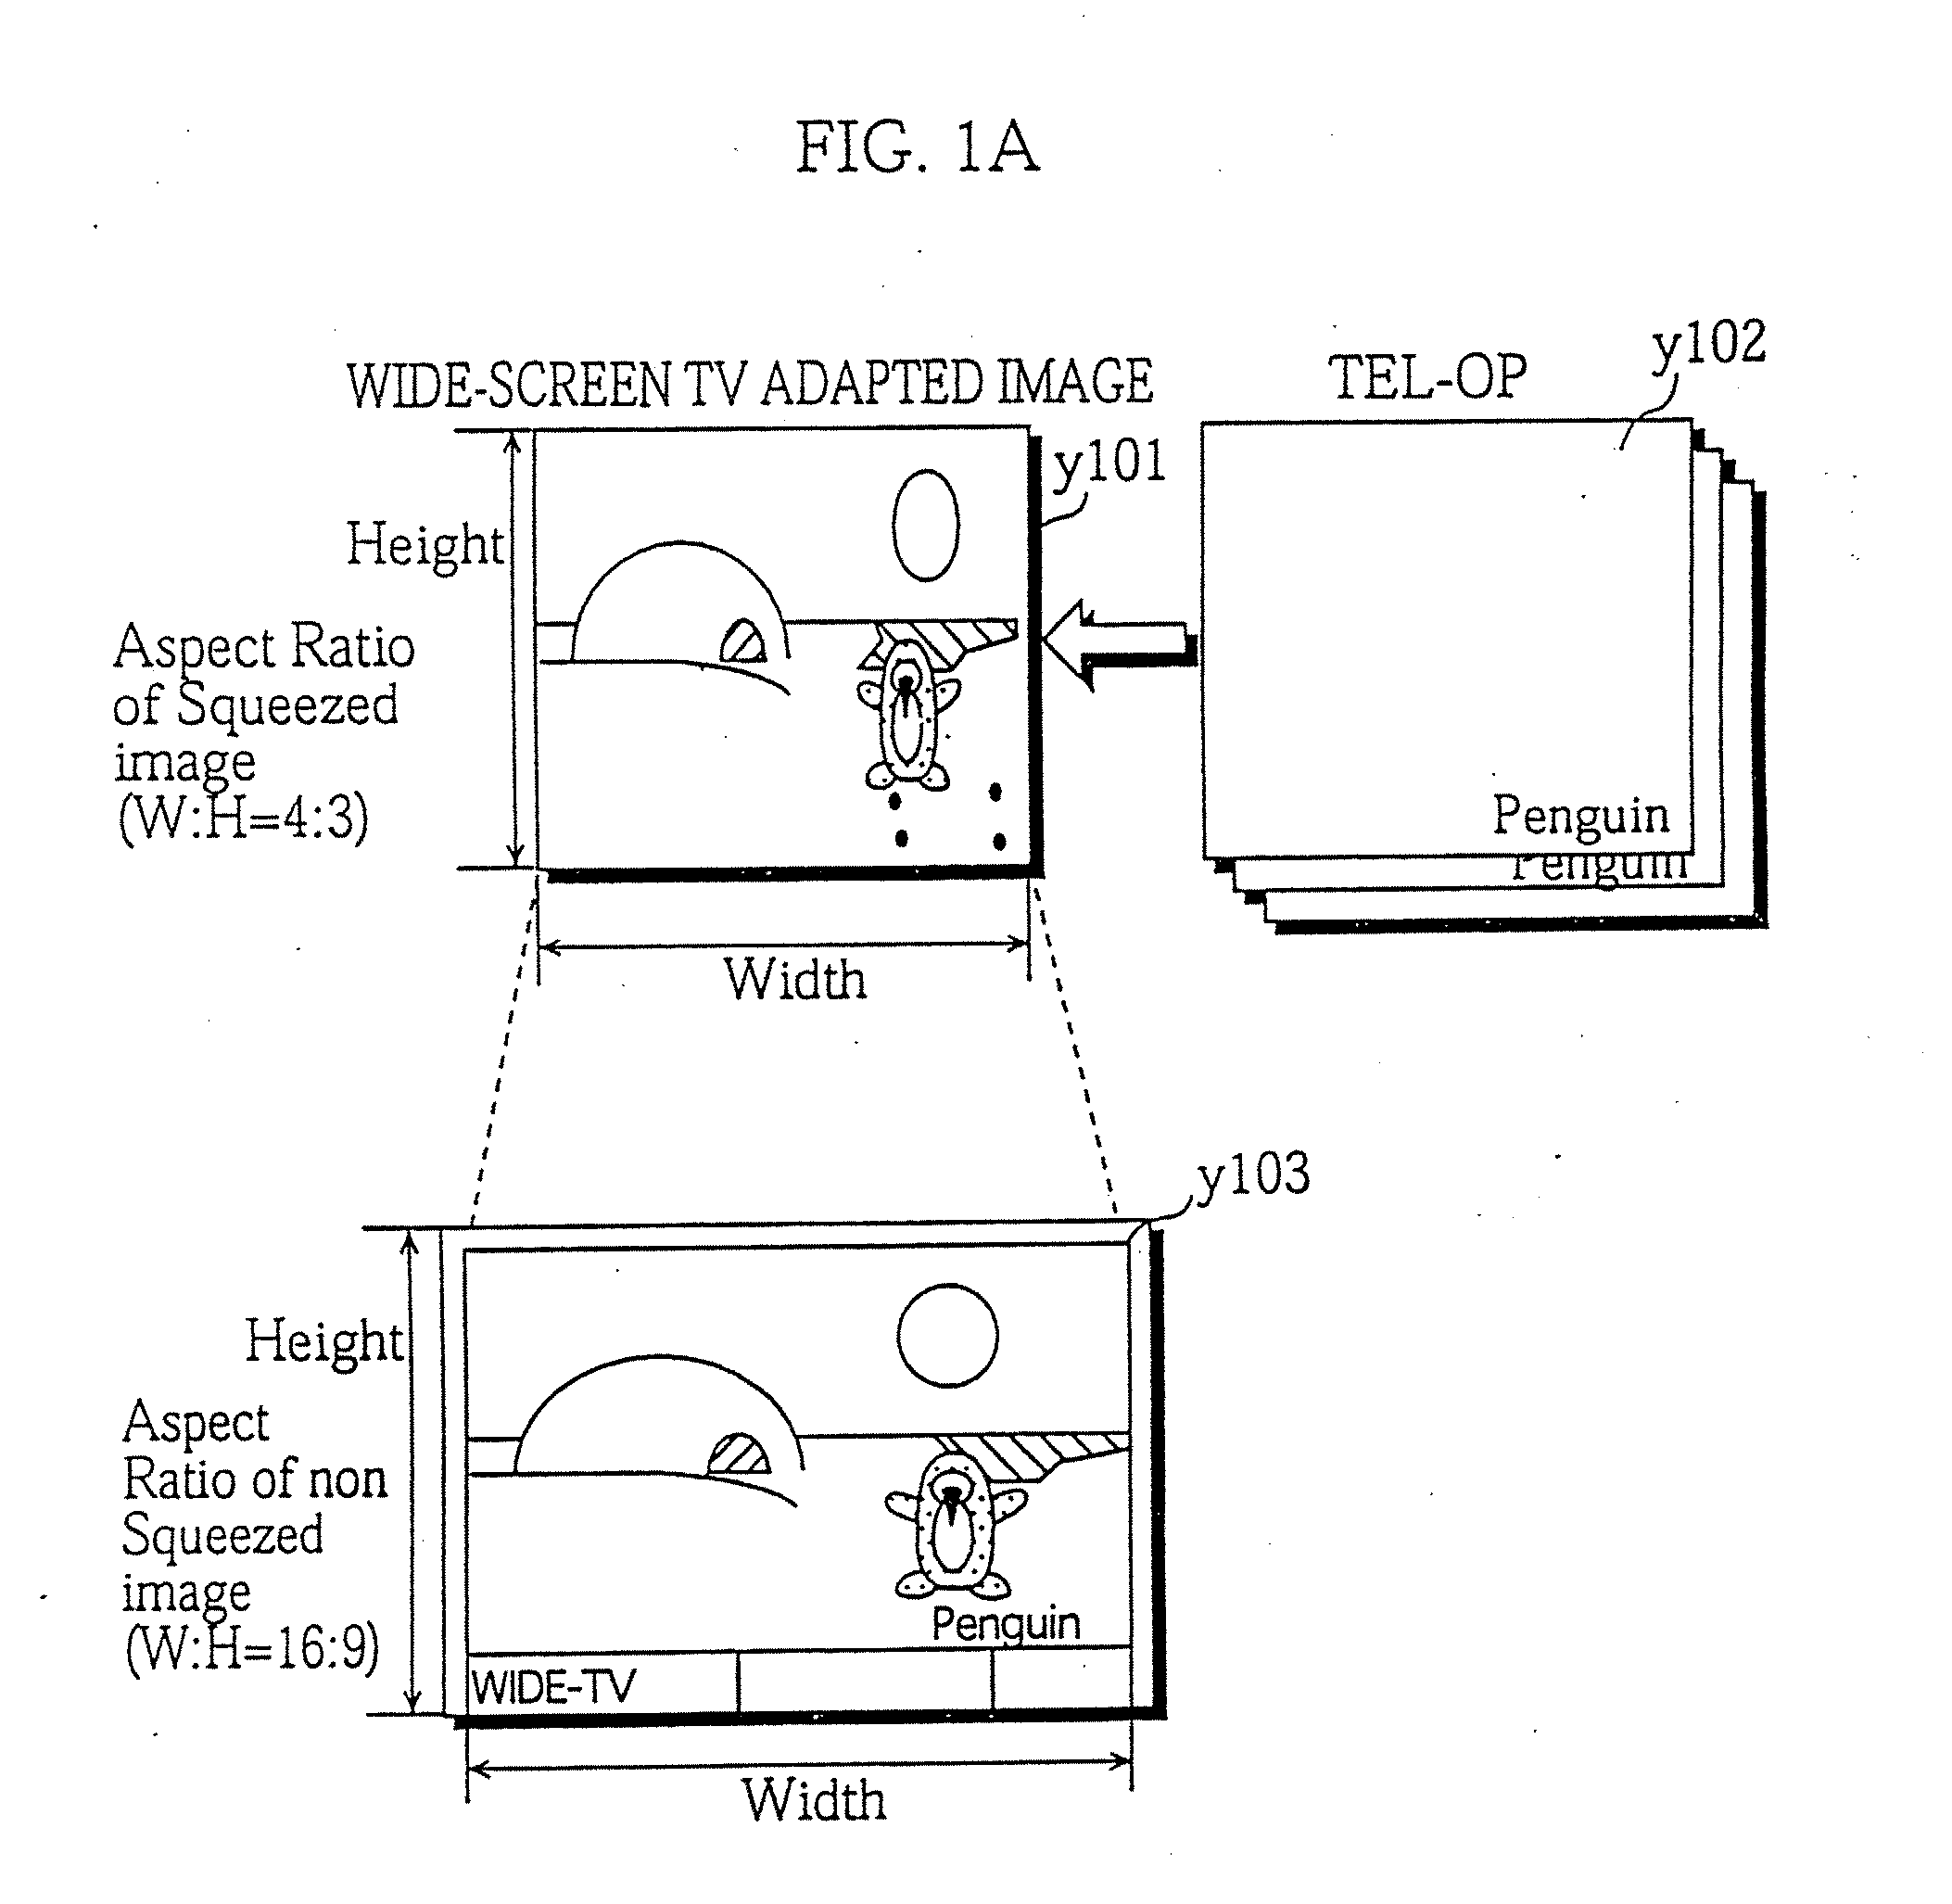 Reproduction apparatus and a reproduction method for video objects received by digital broadcast